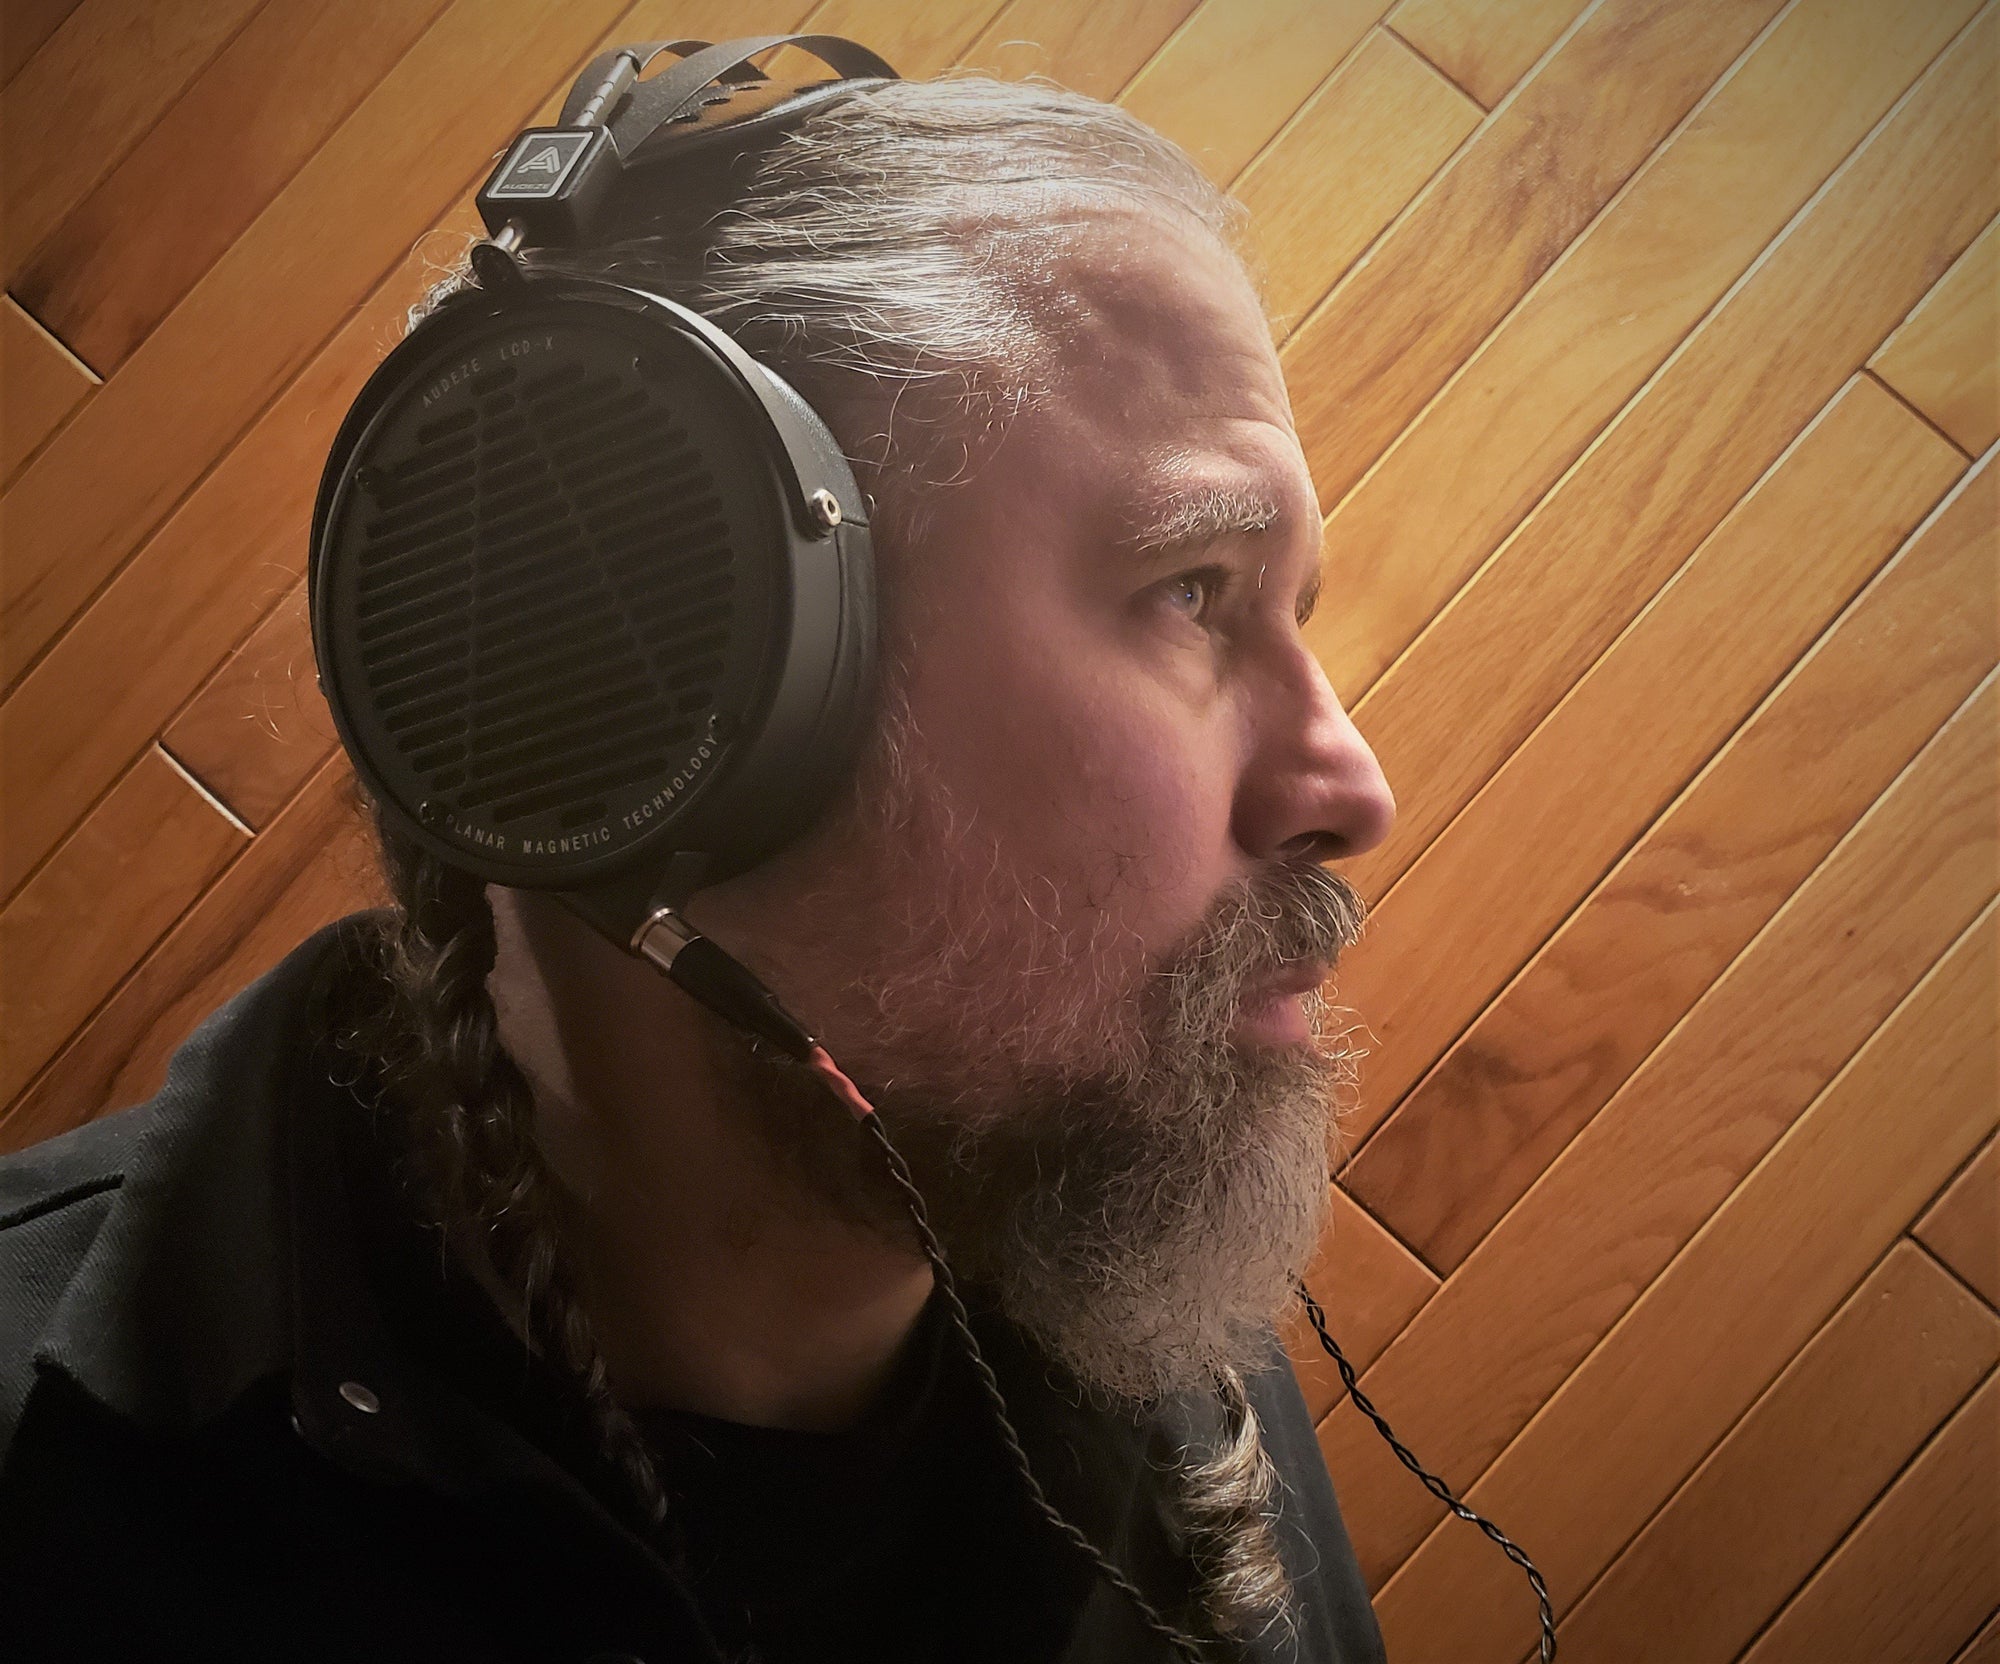 Audeze chats with bassist, composer and guimbri player Joshua Abrams